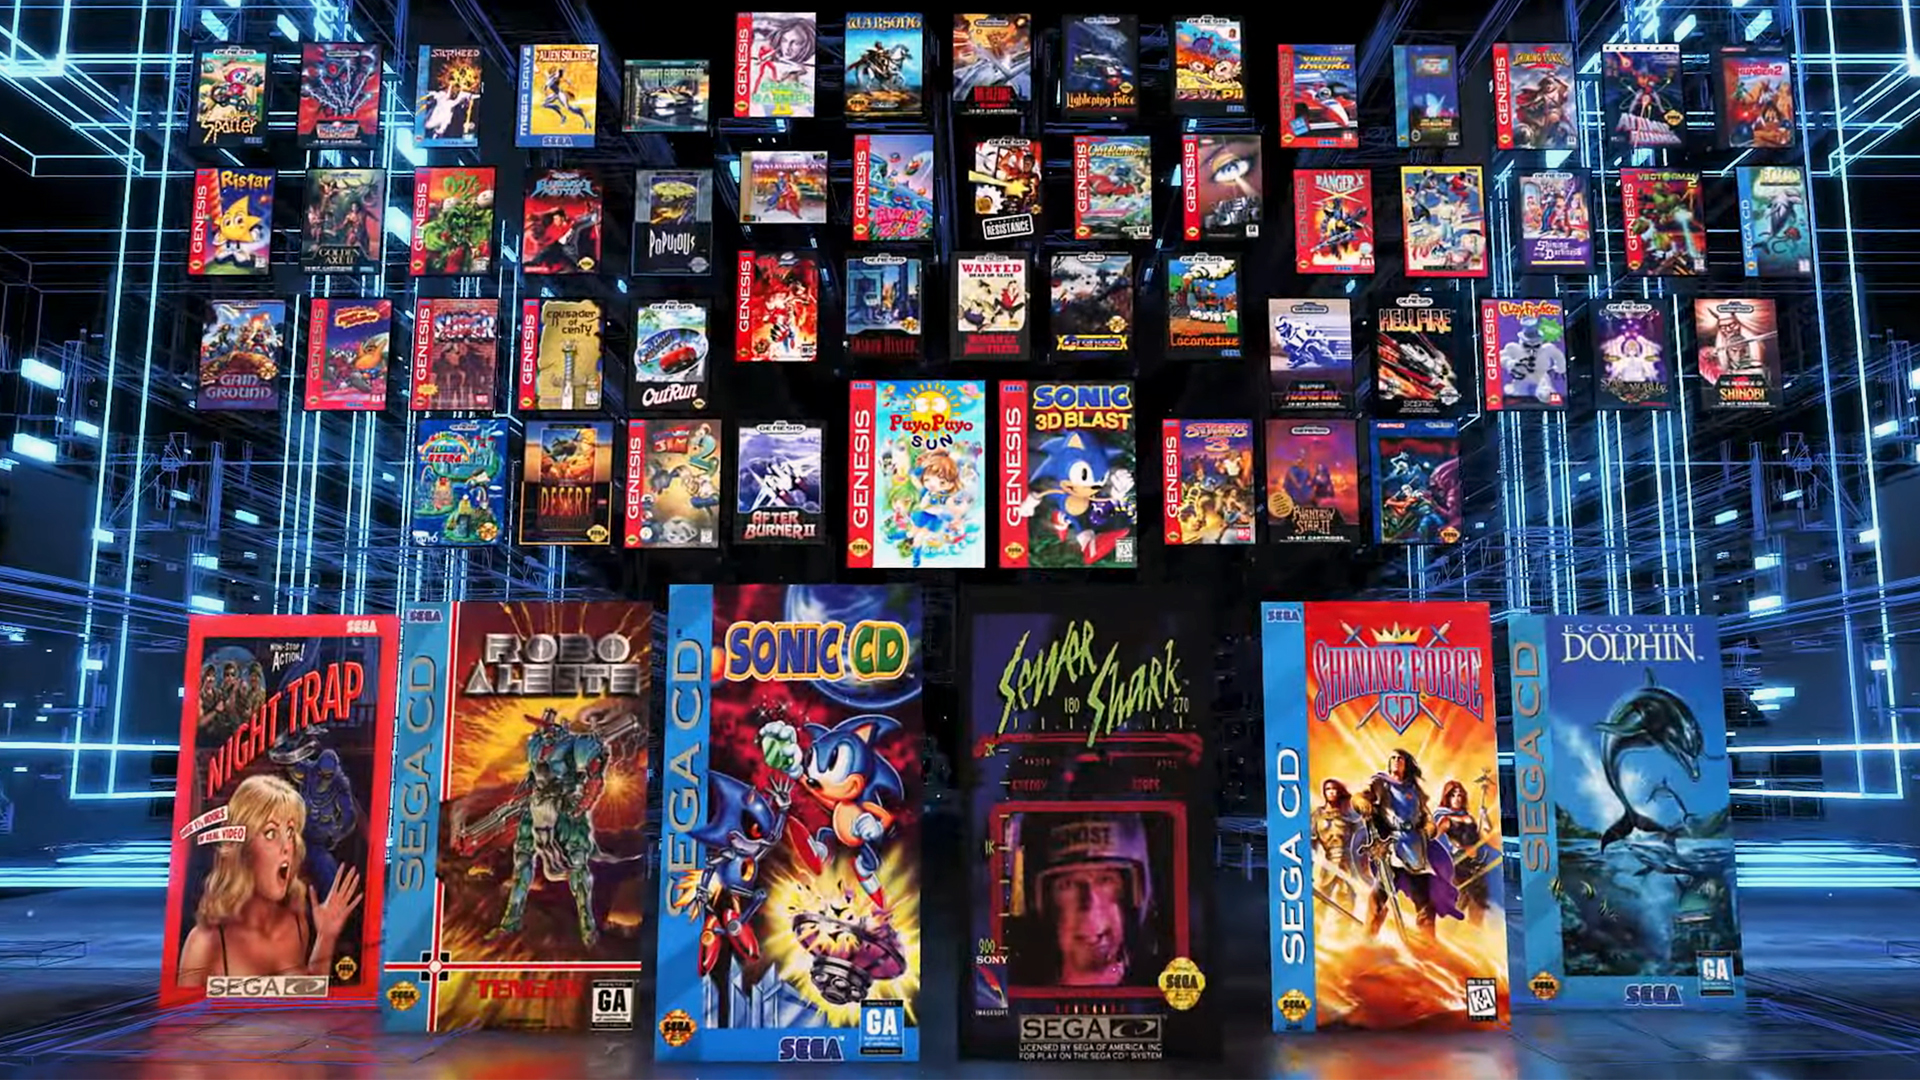 A collage of 60 Sega Genesis and Sega CD games, including Sonic CD, Sewer Shark, Night Trap, and Ecco the Dolphin